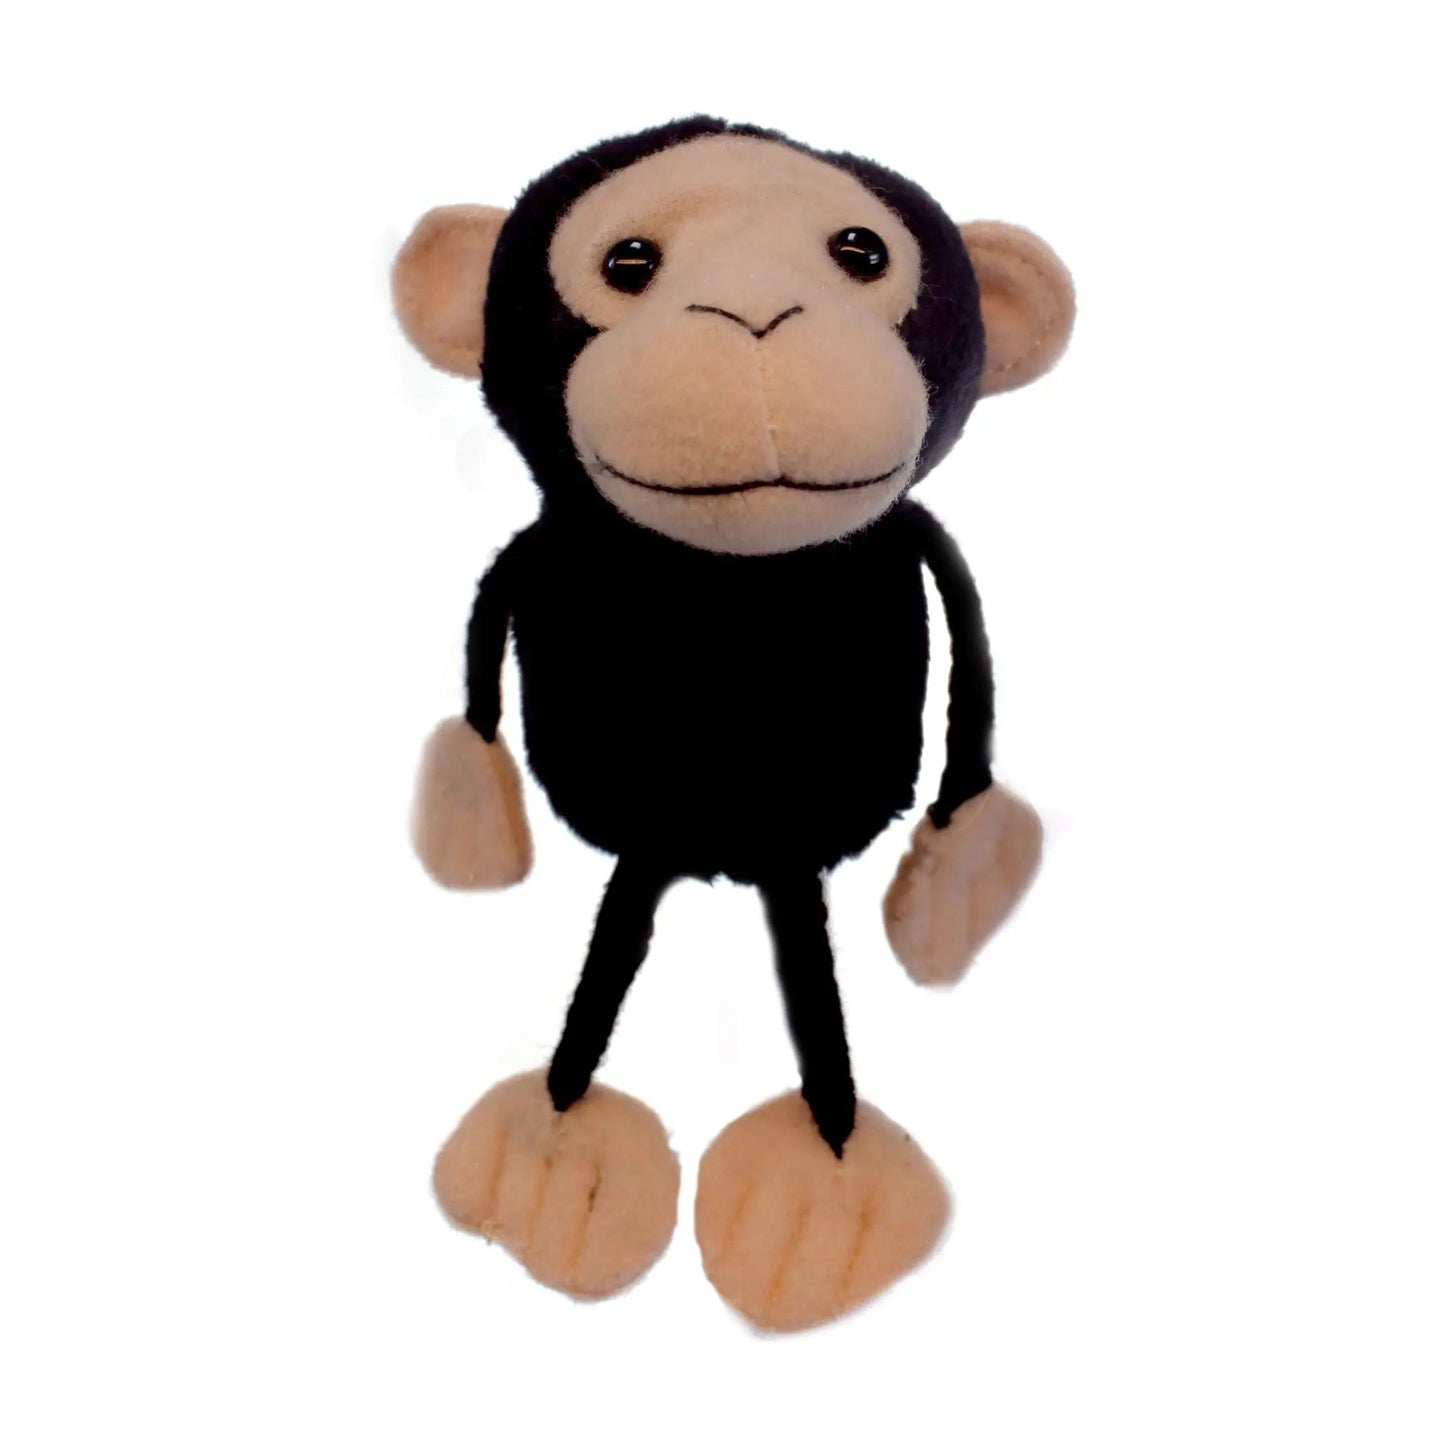 Chimp Finger Puppet - The Puppet Company - The Forgotten Toy Shop